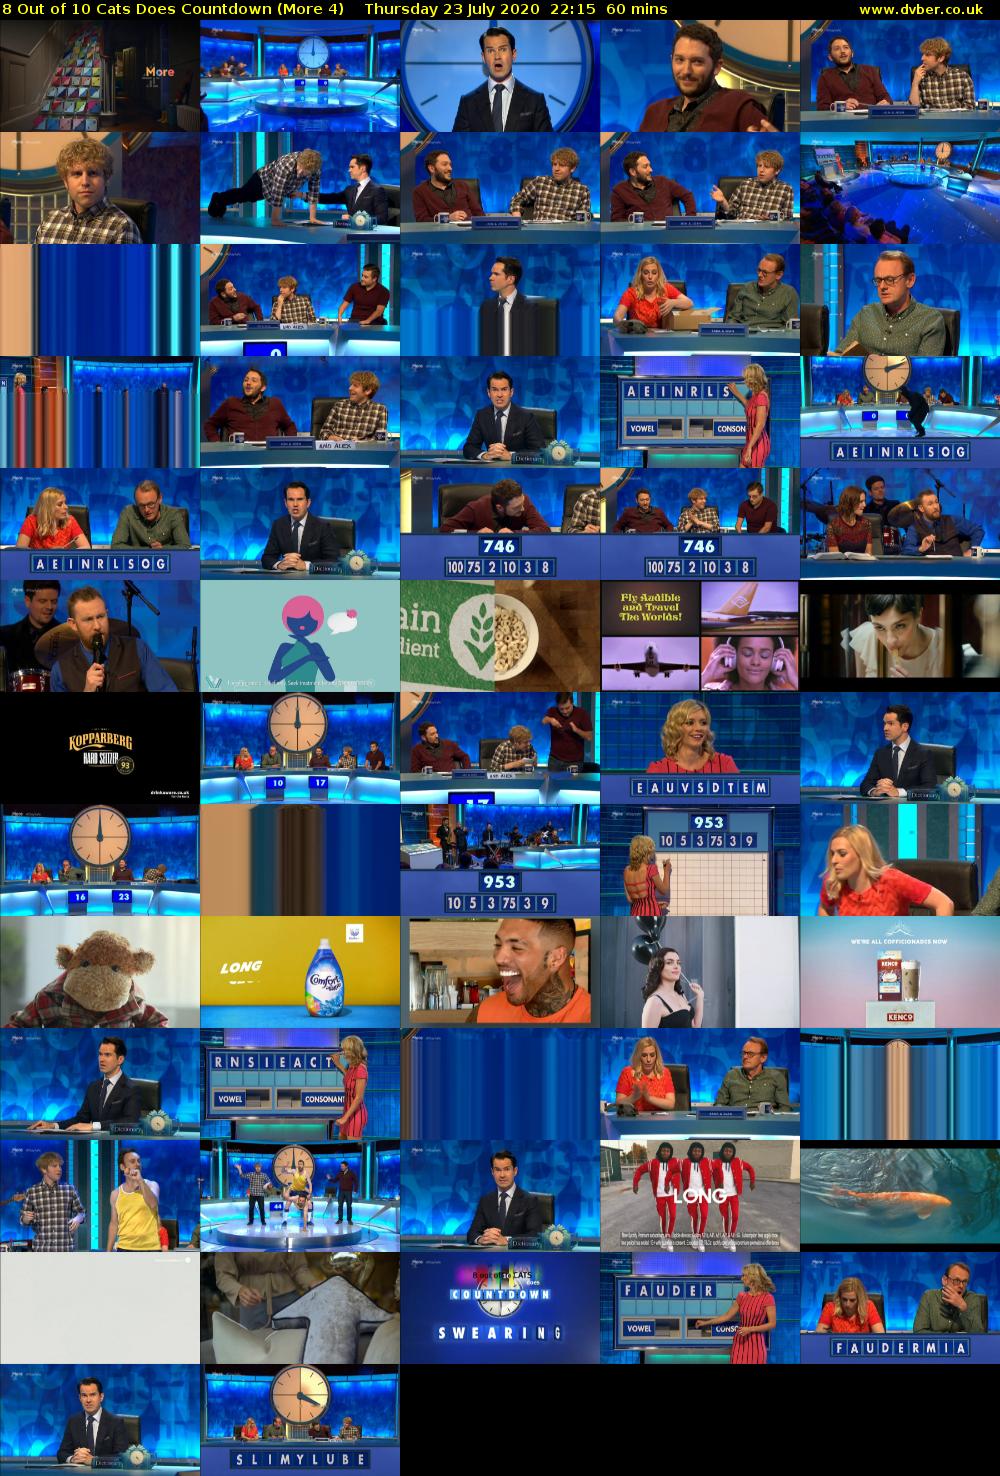 8 Out of 10 Cats Does Countdown (More 4) Thursday 23 July 2020 22:15 - 23:15